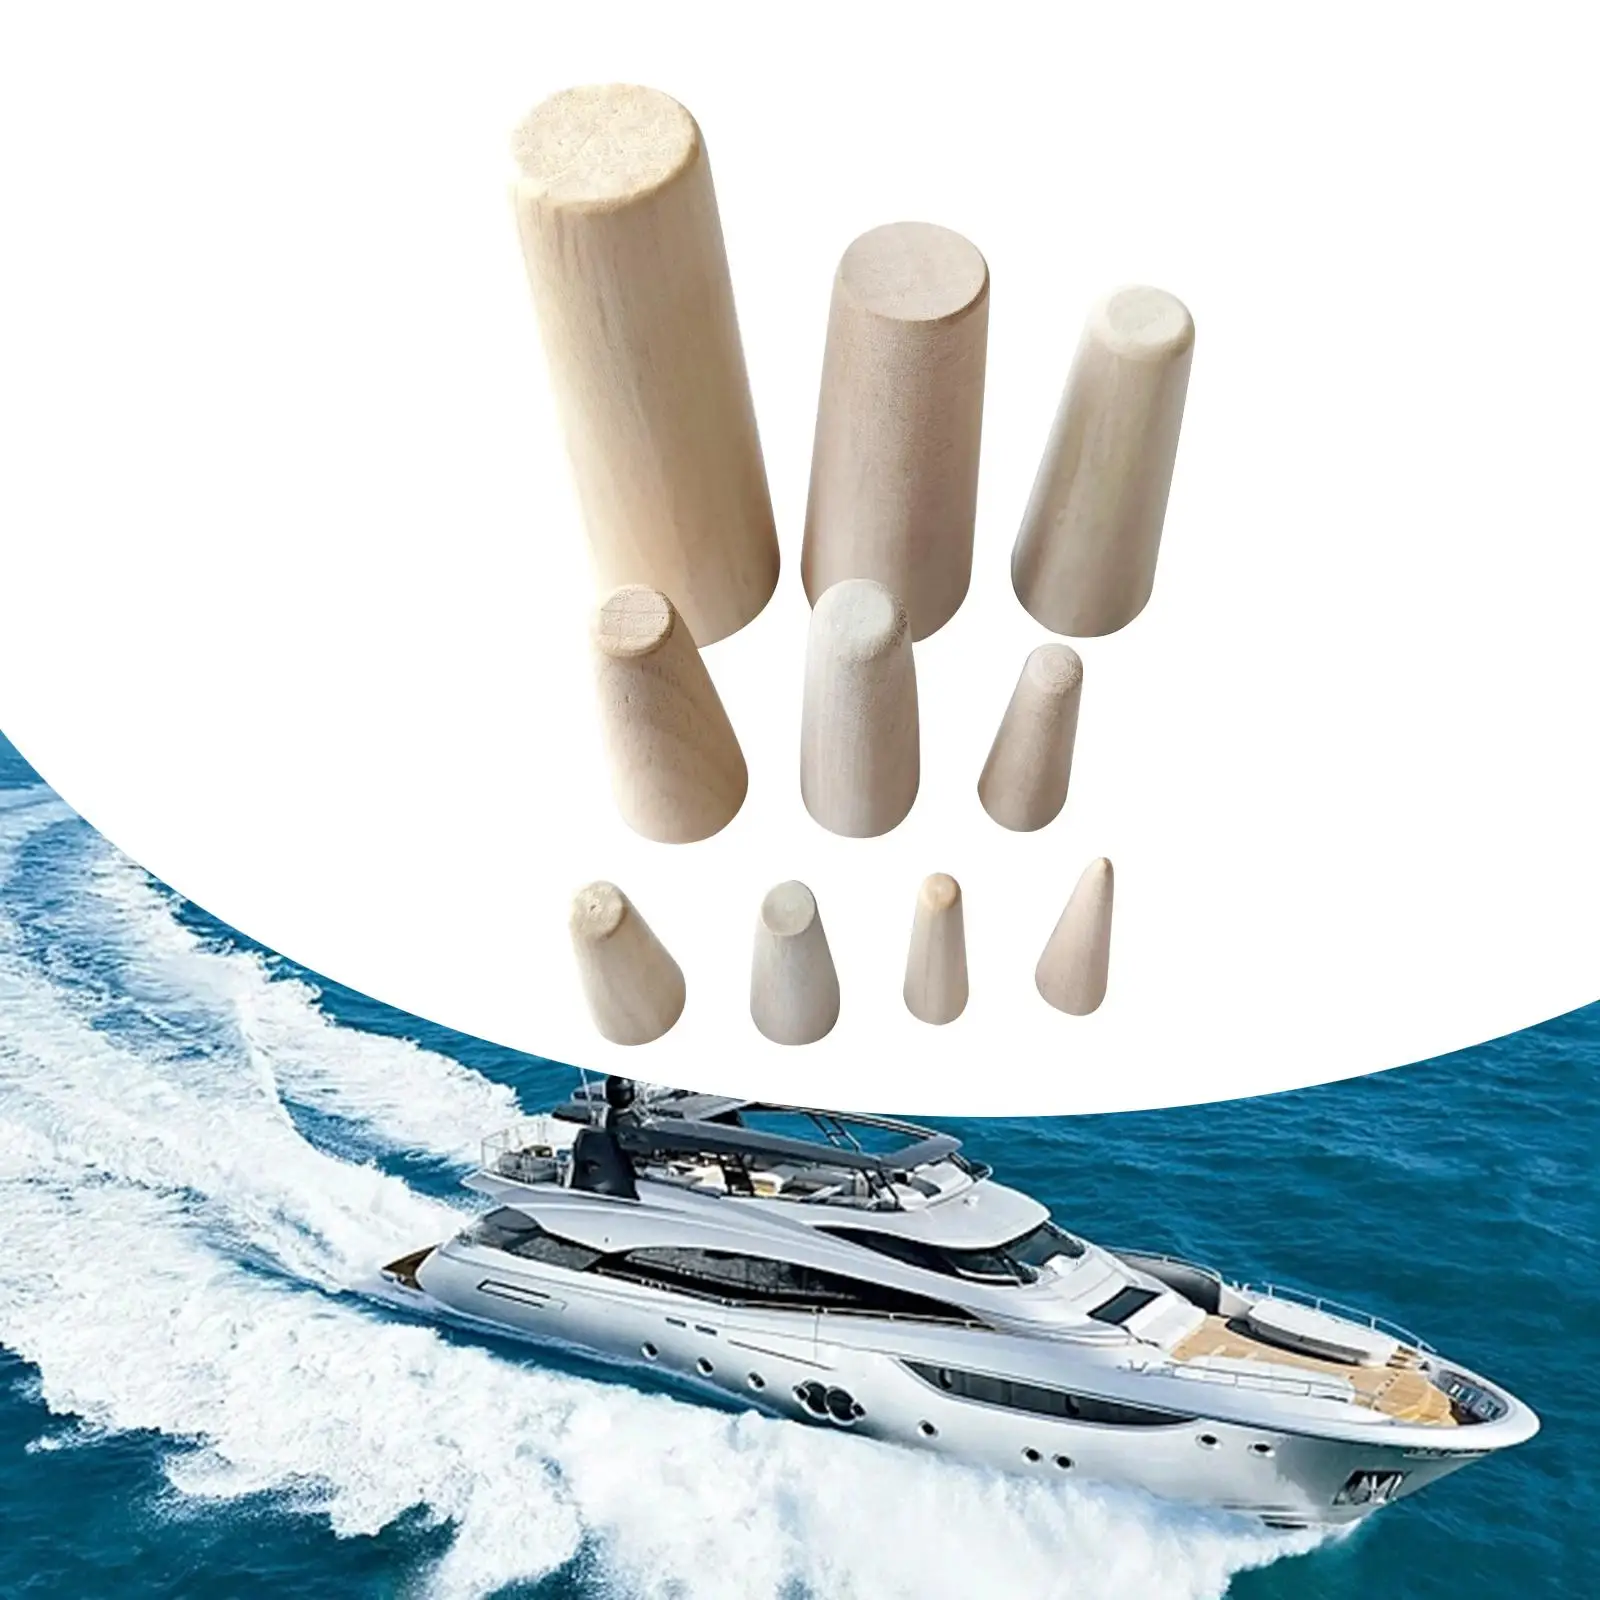 10x Boat Emergency Wood Plugs Tapered Drain Stopper for Yacht Ships Boat